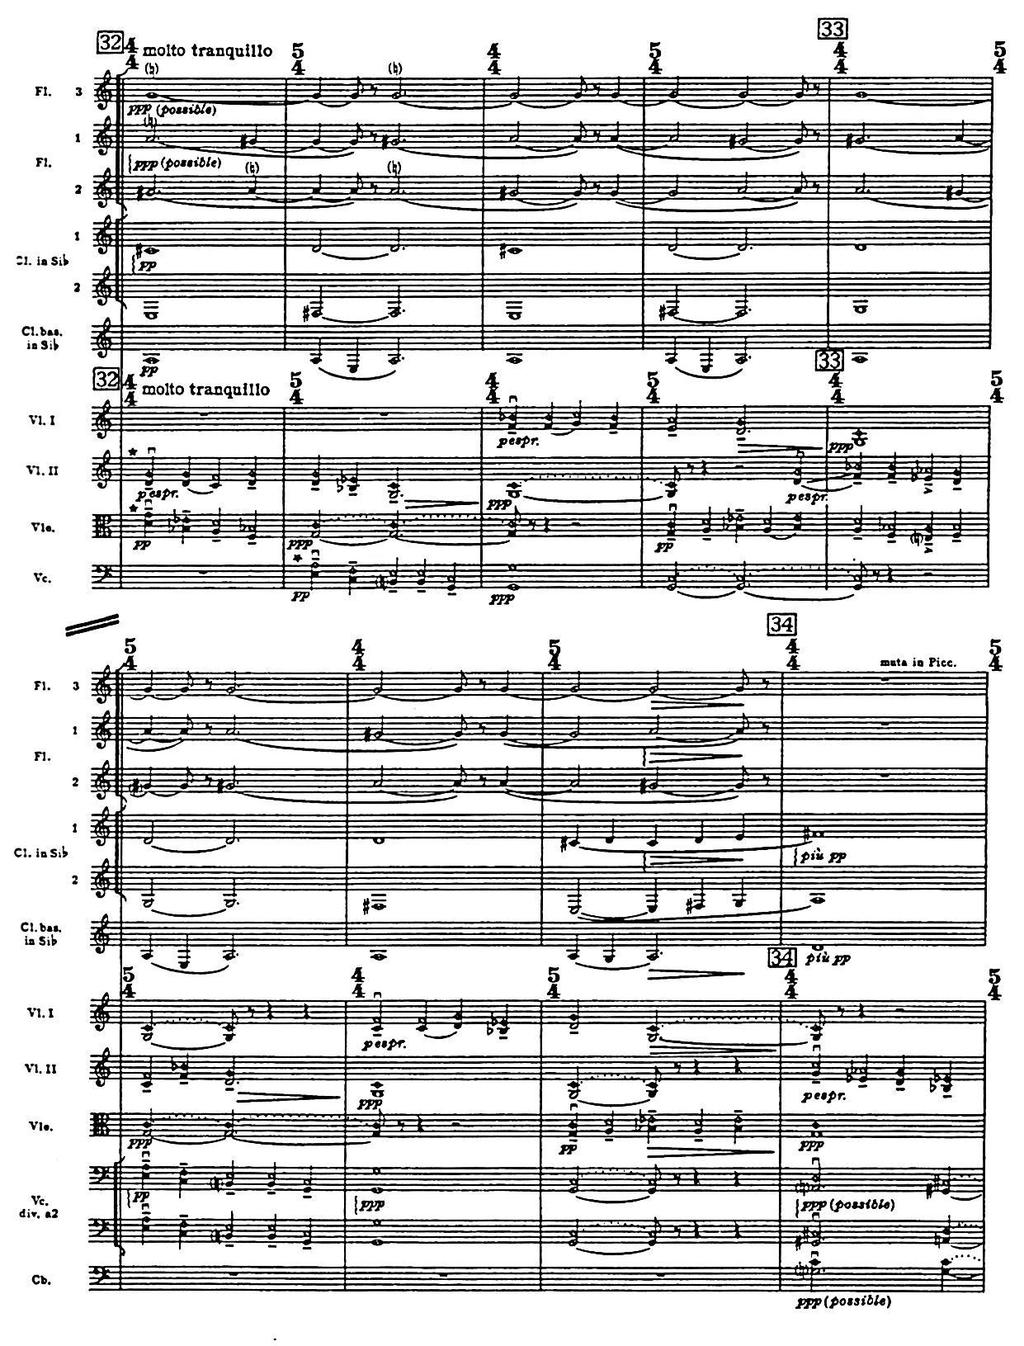 Figure 43: Sinfonia Sacra, Hymn (Orchestral Layering) The Hymn, from RM.32 providing an example of orchestral layering in Sinfonia Sacra played by the entire orchestra.